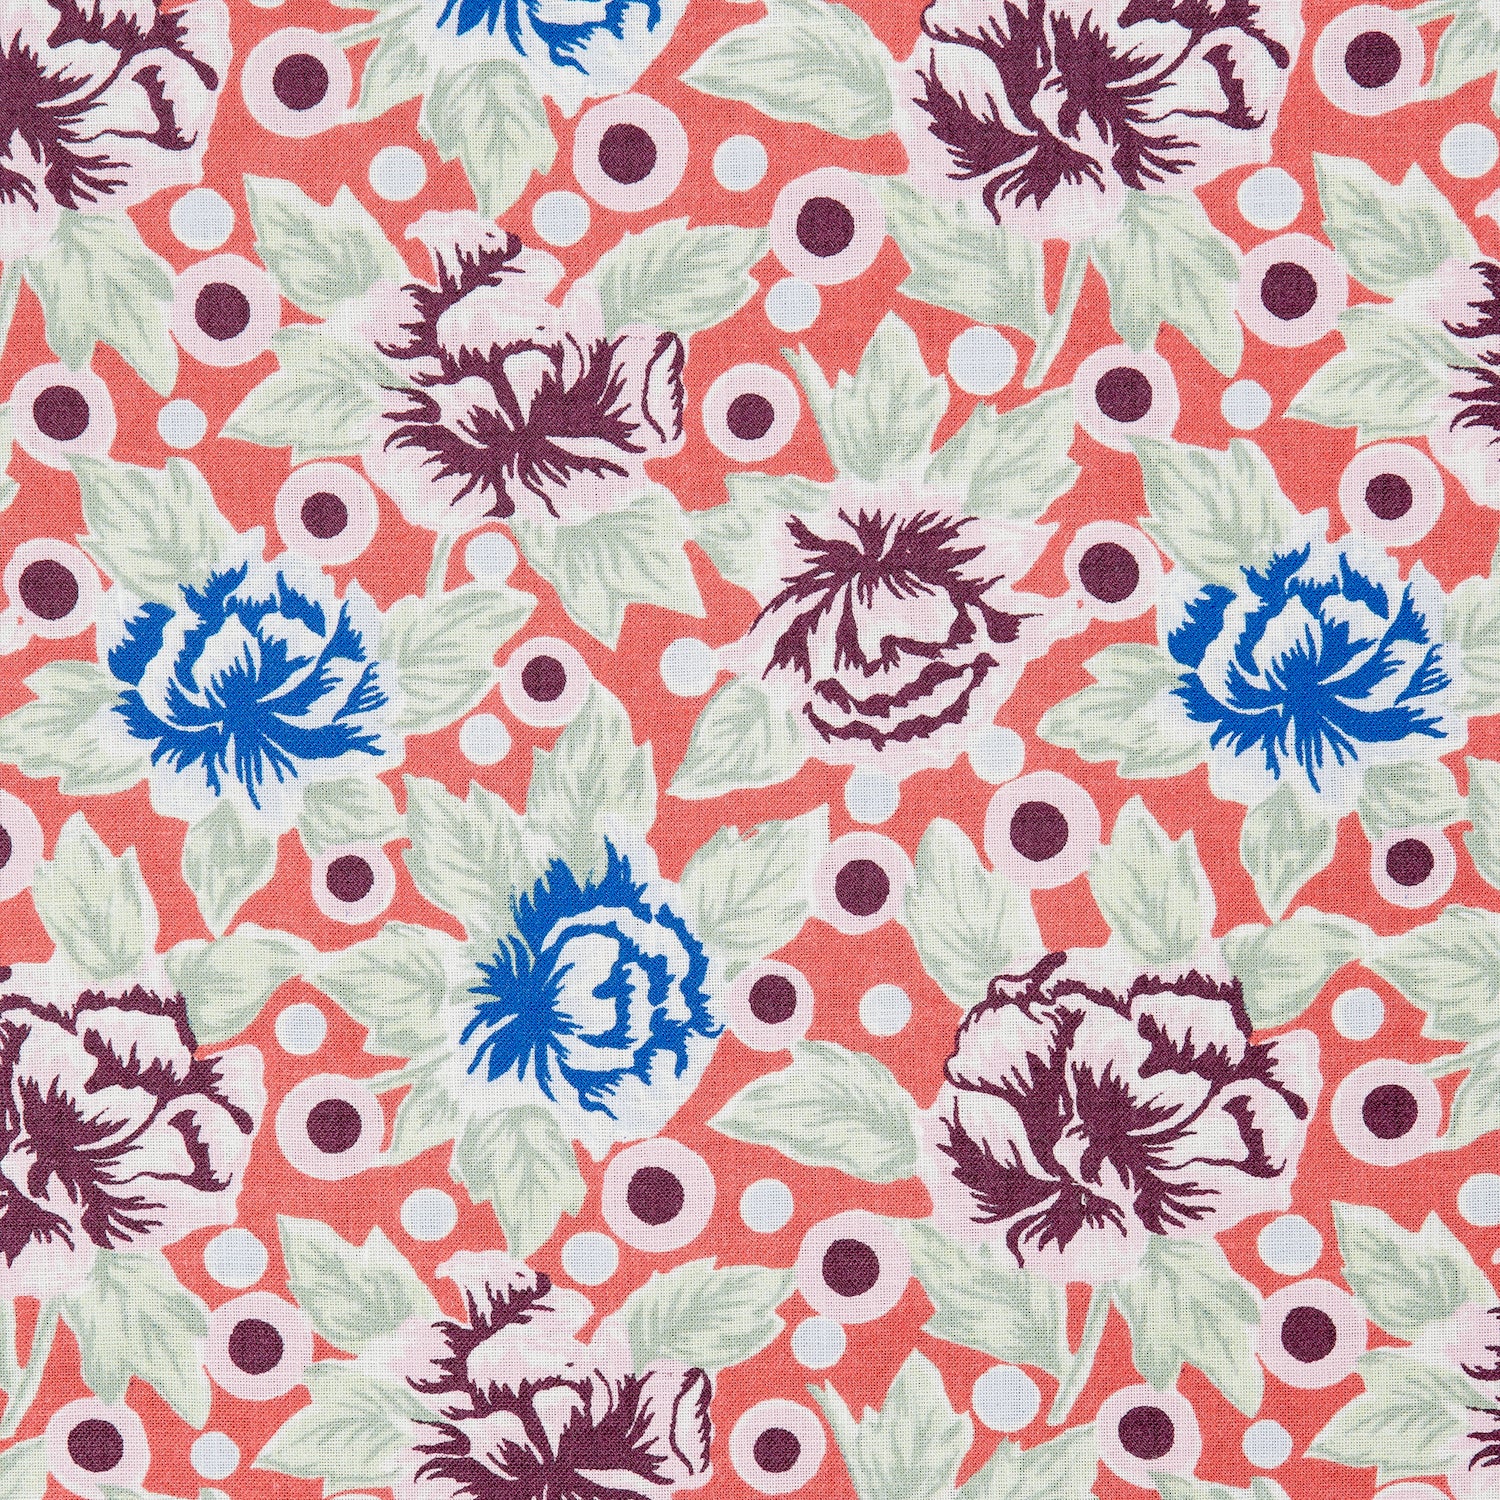 Detail of a printed linen fabric in a repeating china rose pattern in shades of pink, blue and cream on a coral field.